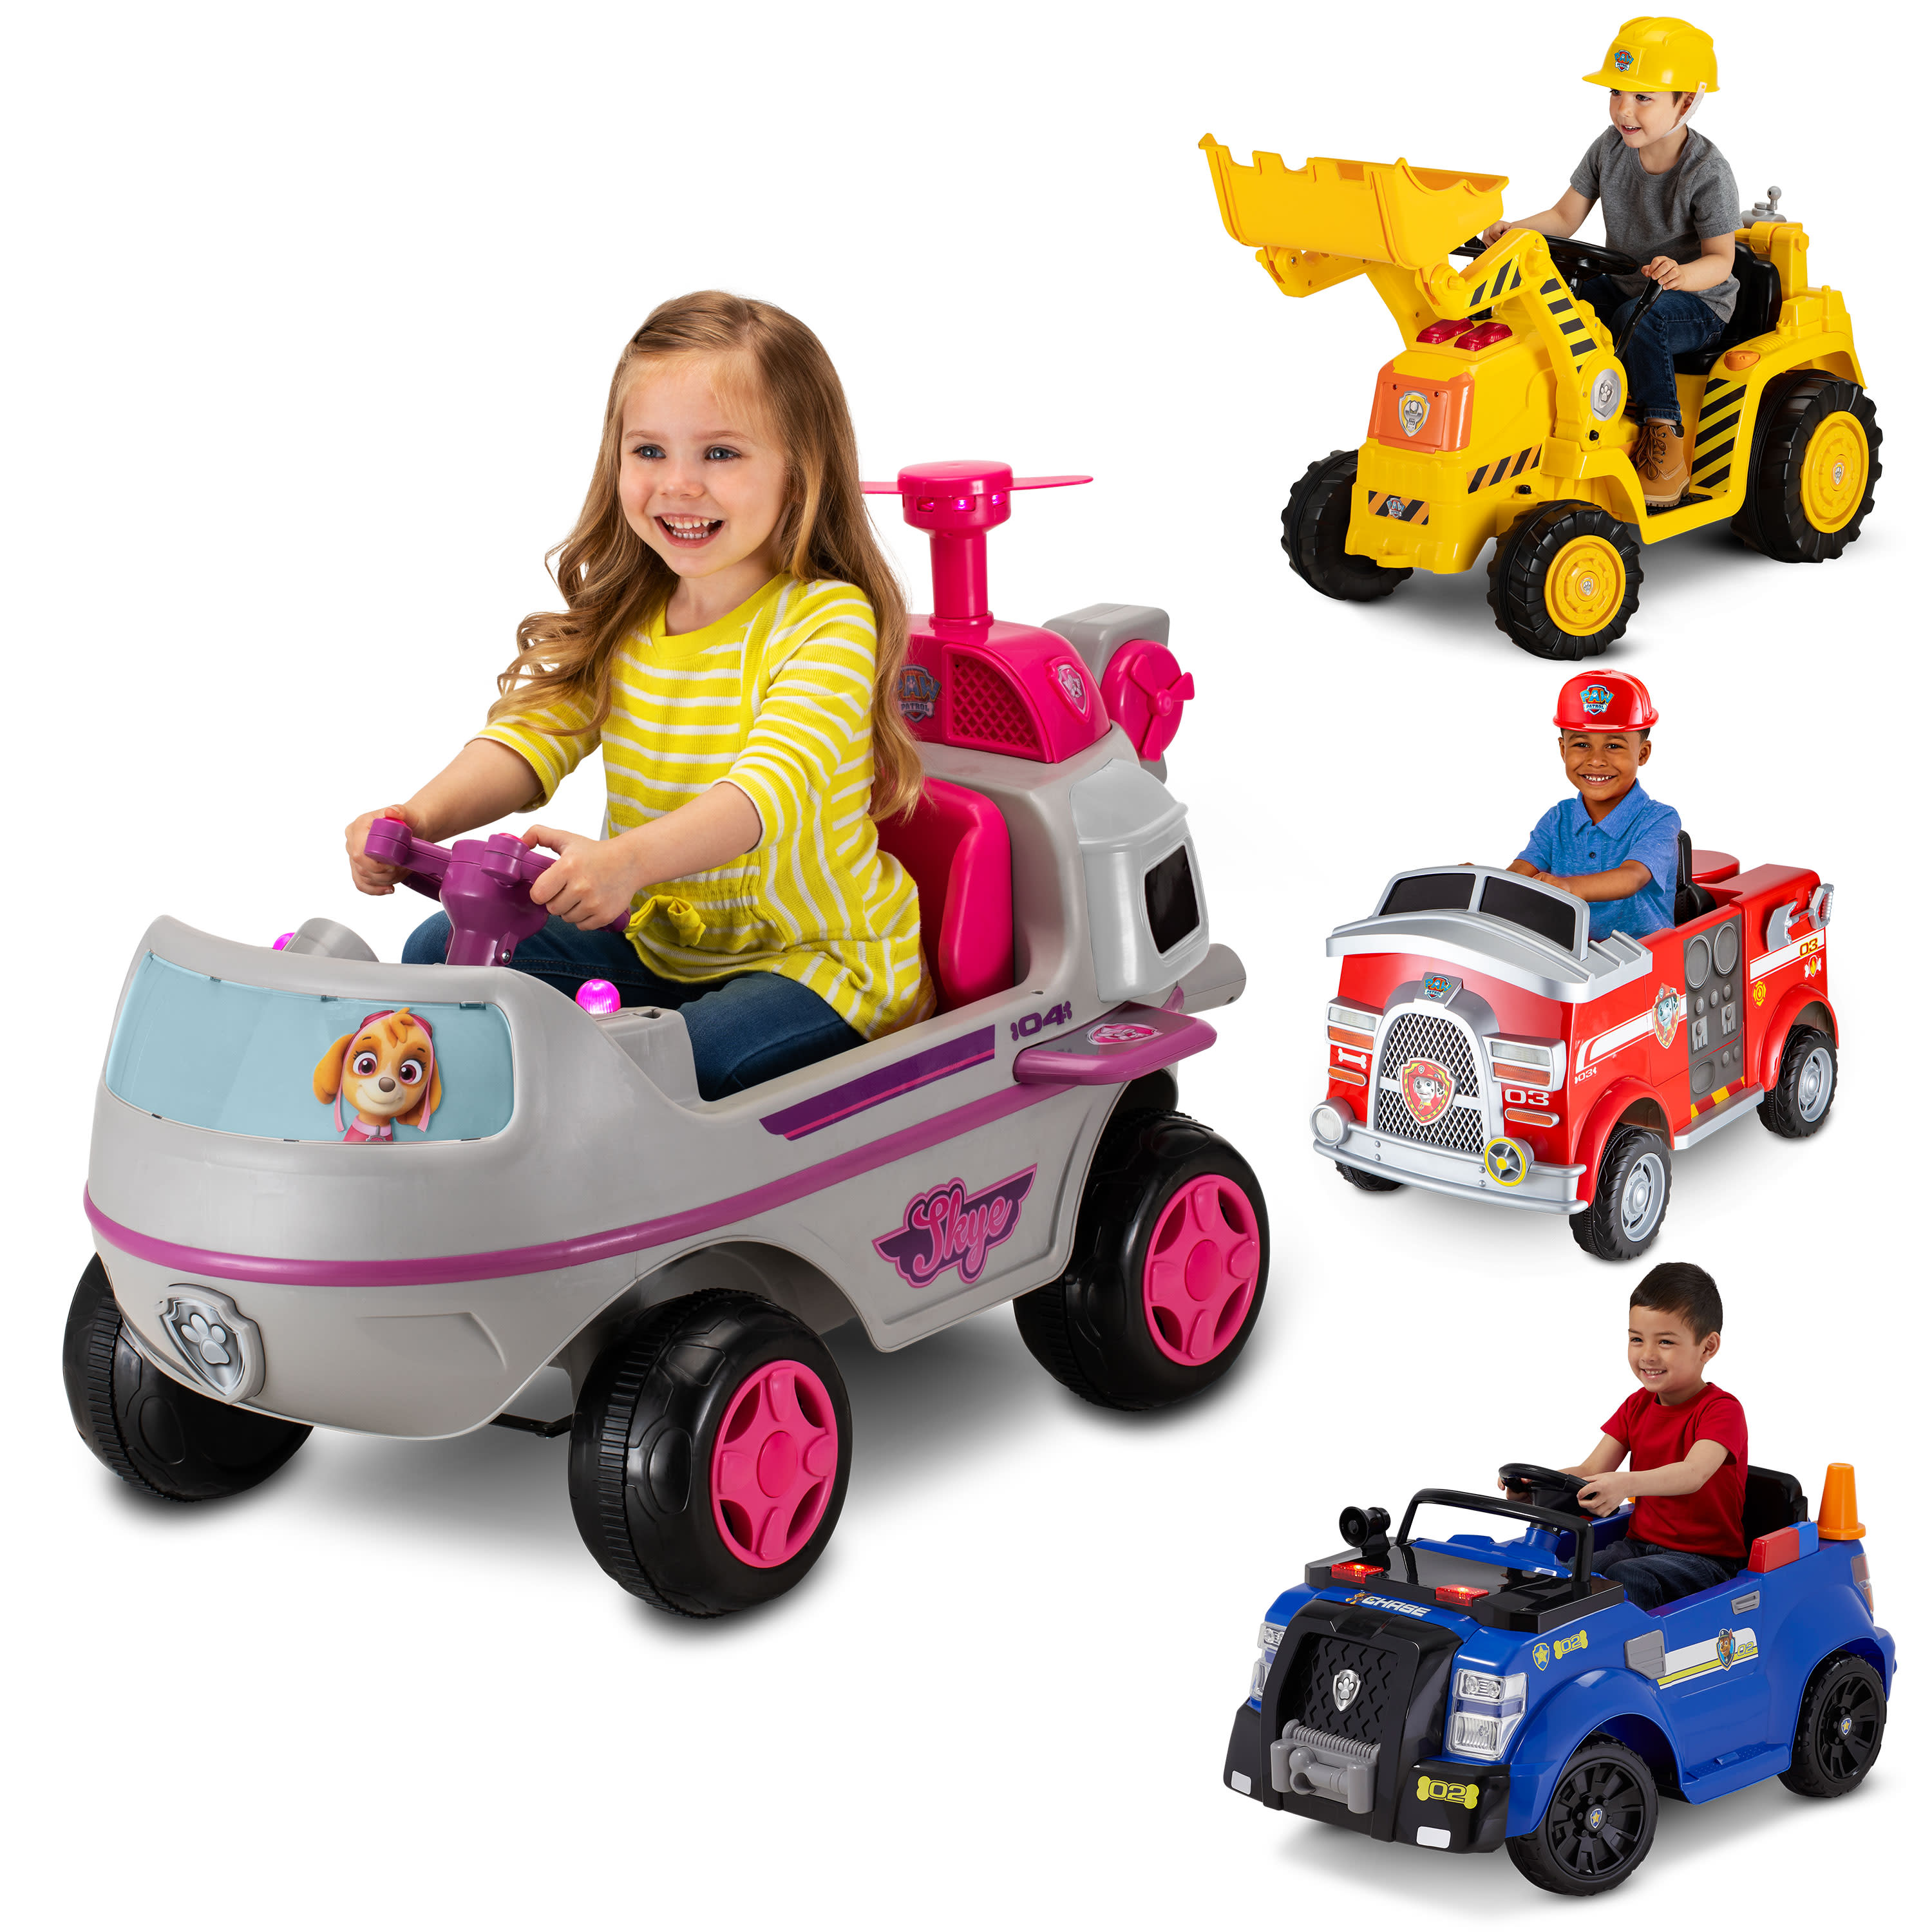 Kid Trax Nickelodeon’s PAW Patrol: Marshall Rescue Fire Truck Ride-On Toy